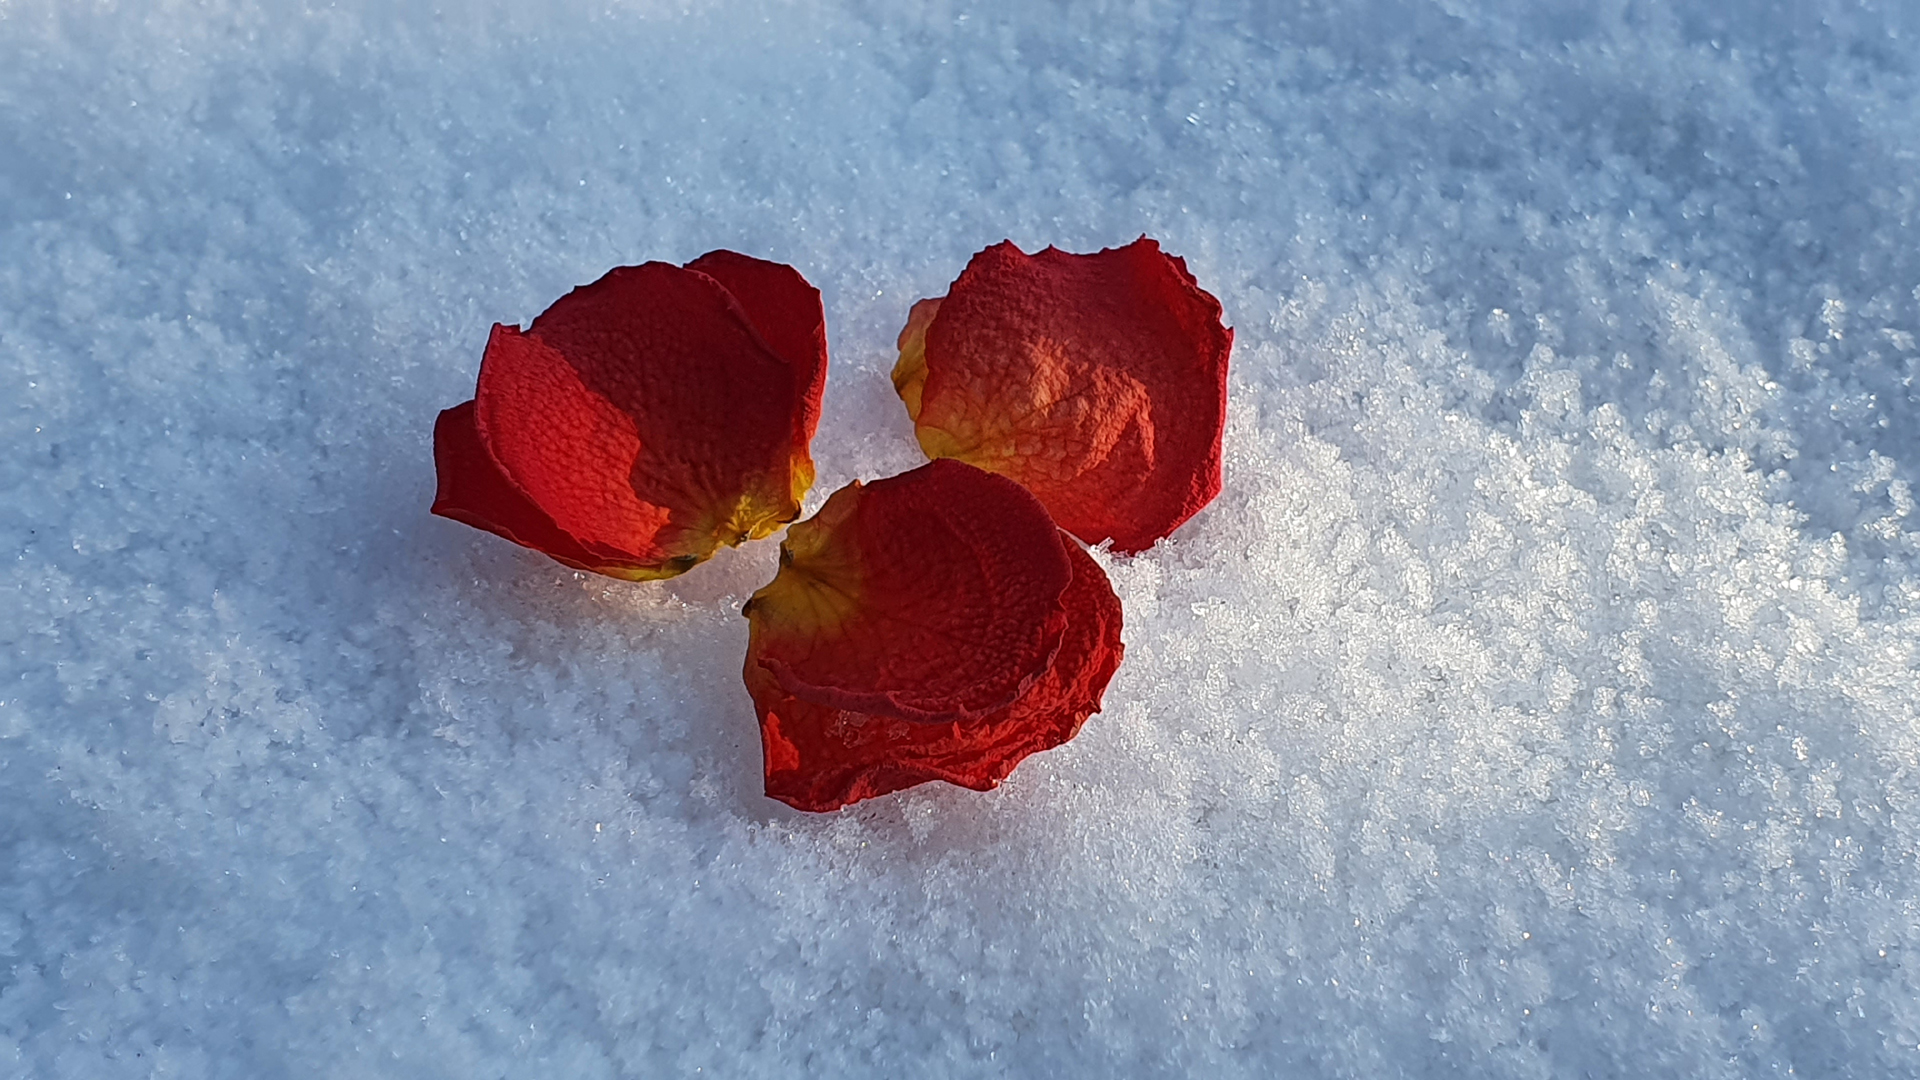 Best of Andreas Hollinek: Flowers And Snow